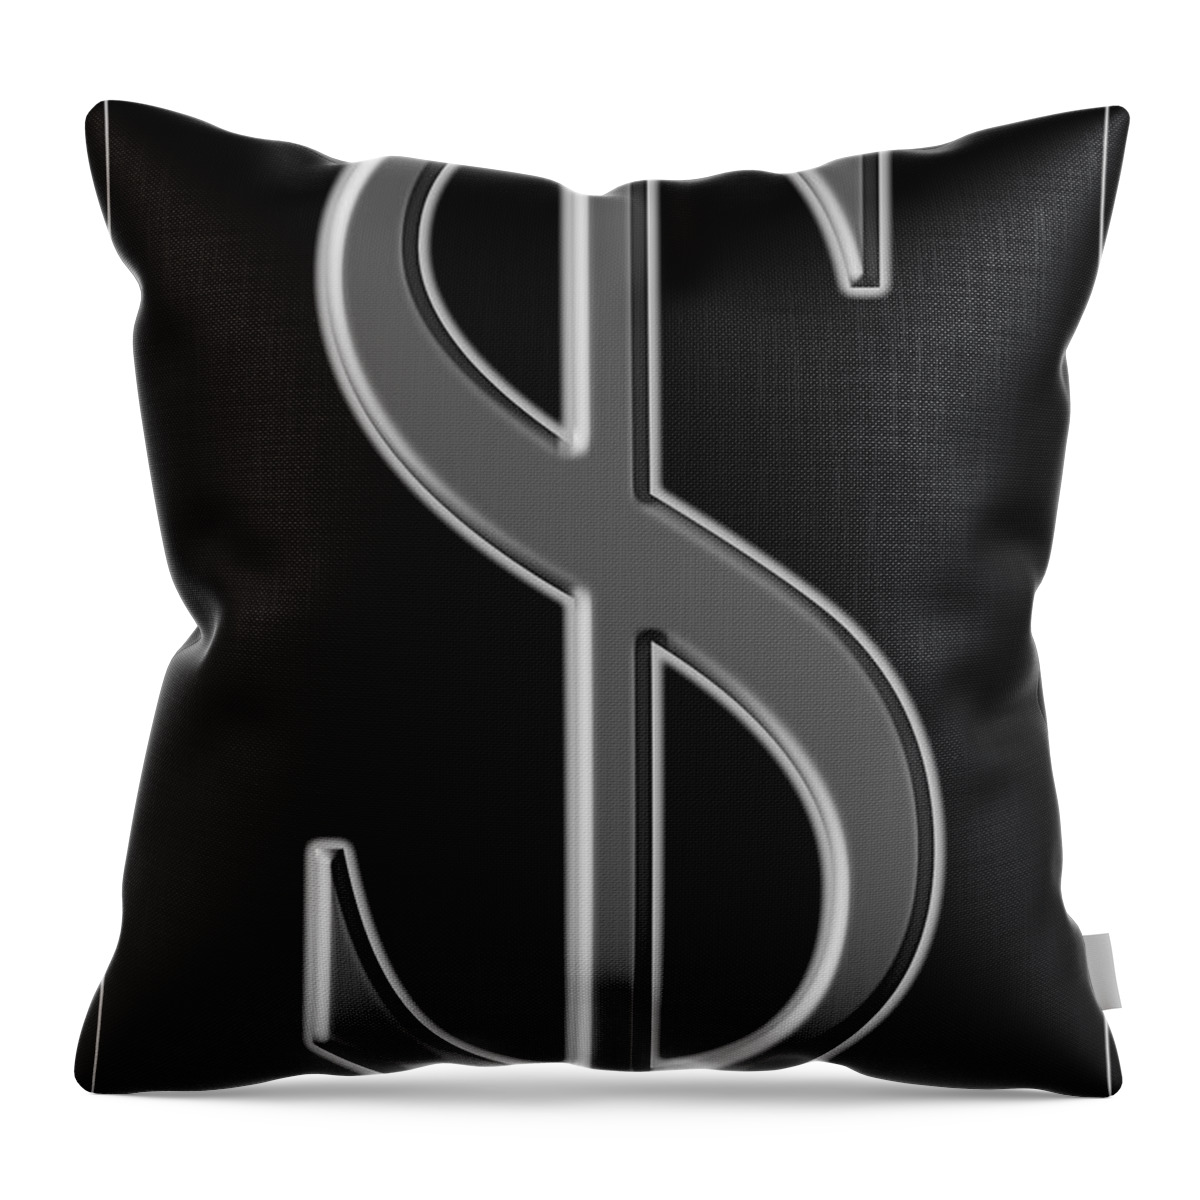 Dollar Throw Pillow featuring the photograph Dollar Sign 2 by Andrew Fare